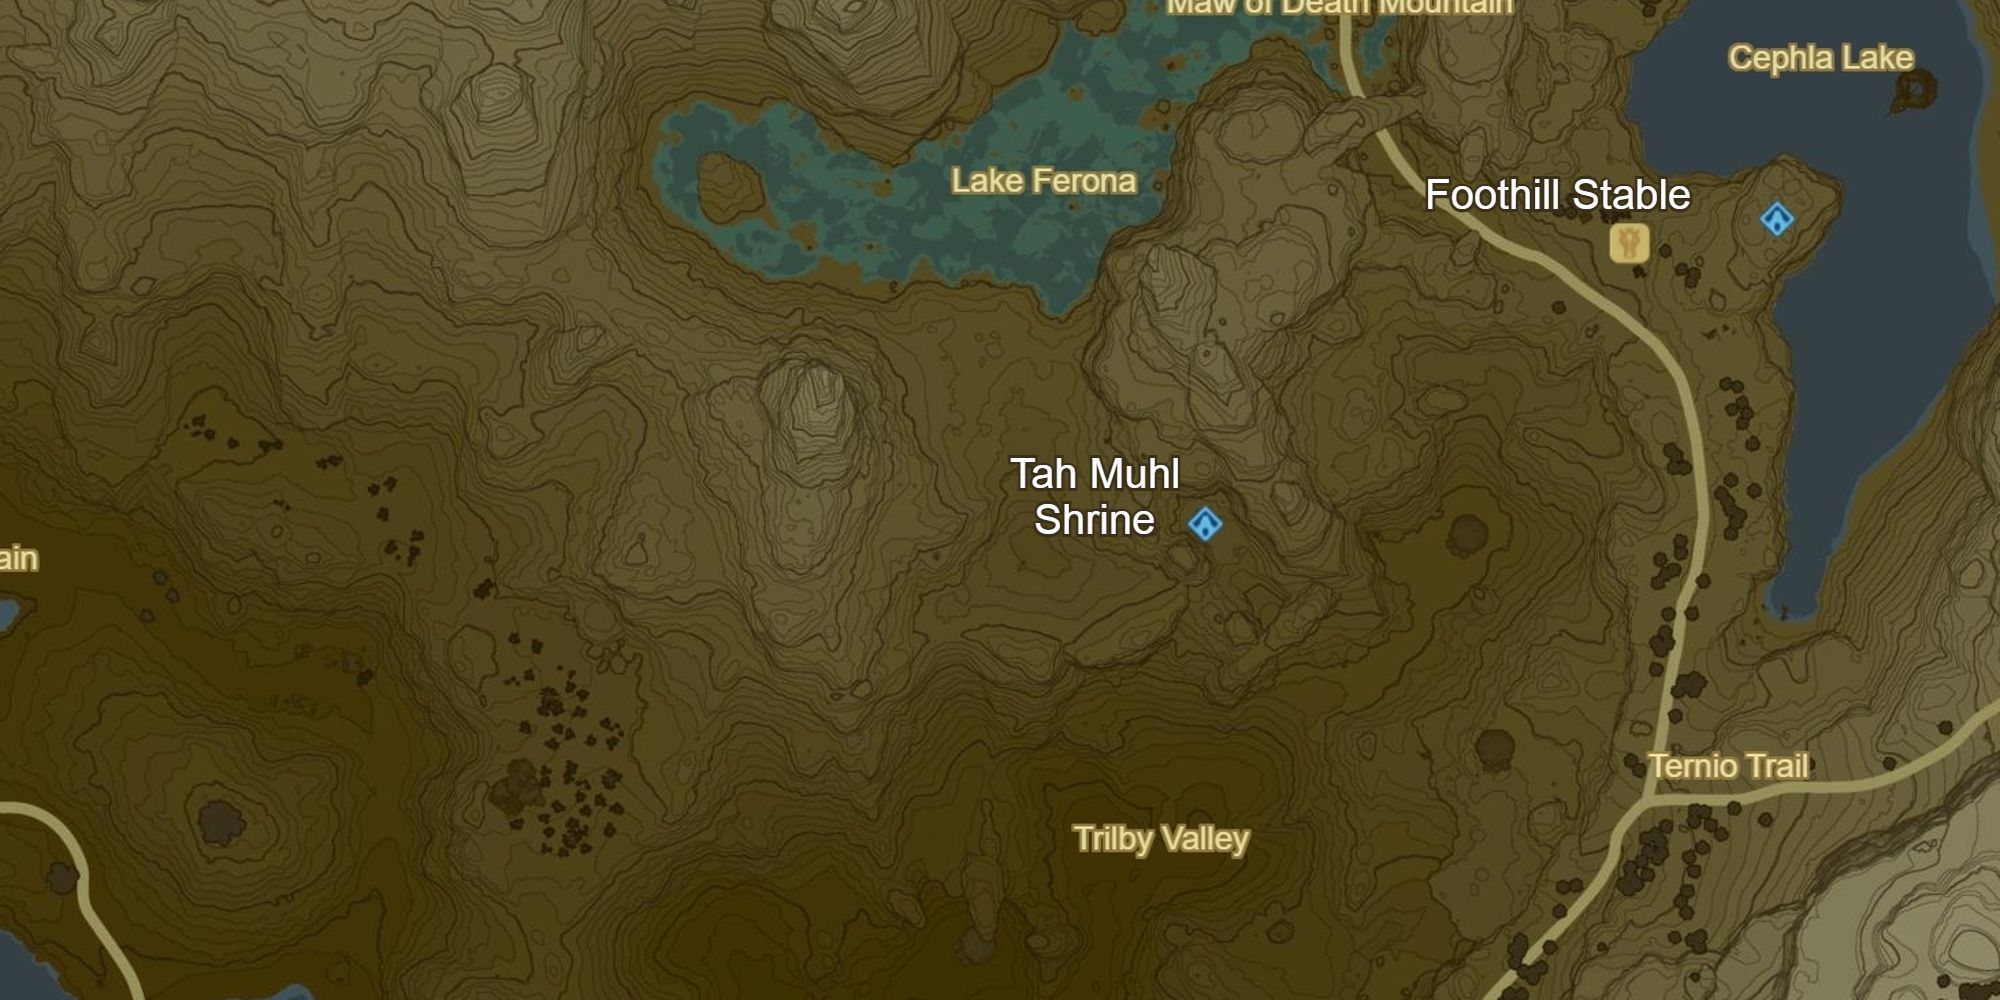 location of the tah muhl shrine and foothill stable